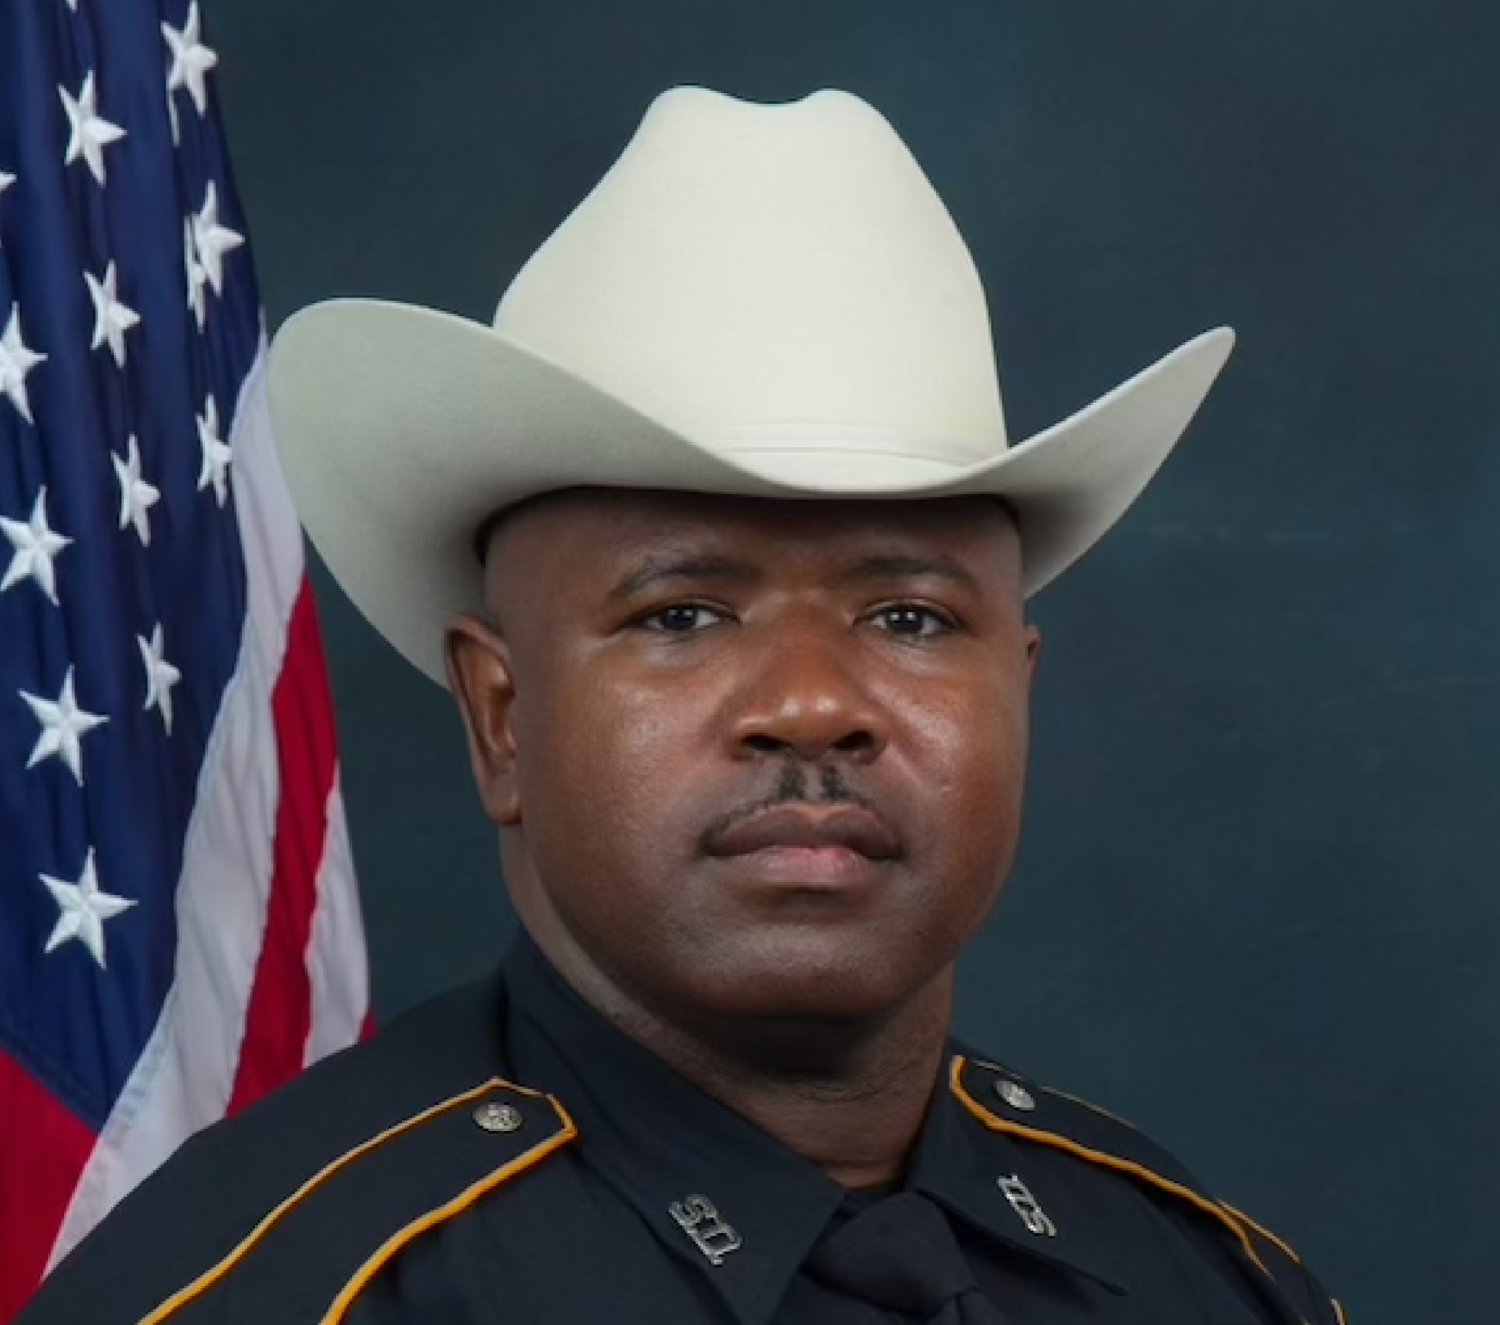 HCSO Sergeant Bruce Watson died died due to injuries sustained after being involved in an accident after he'd finished up escorting a funeral procession. His own funeral plans are not yet determined.